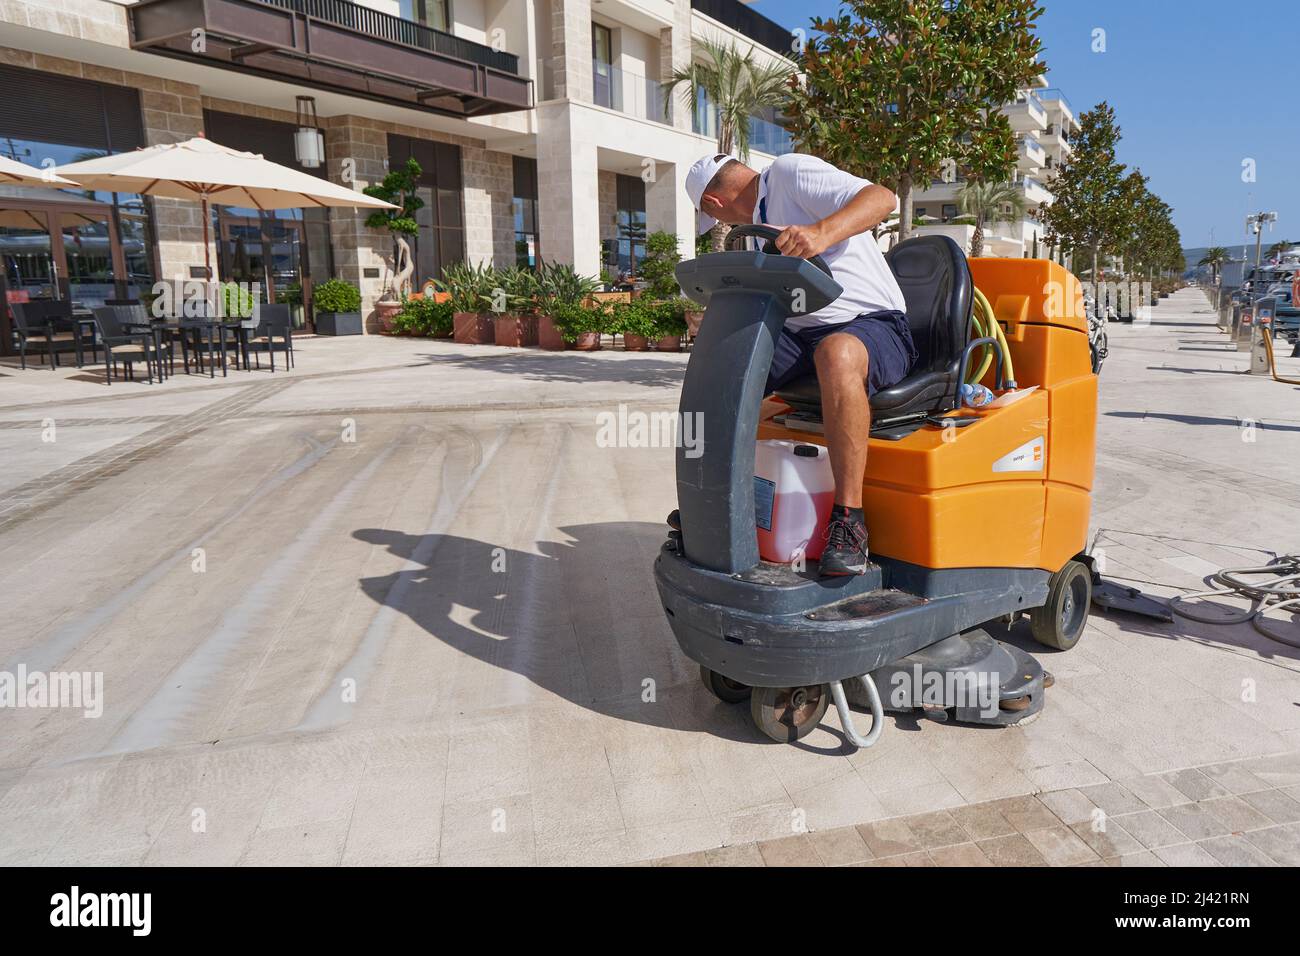 TIVAT, MONTENEGRO - JULY 15, 2021: A worker washes sidewalks on a special cleaning machine Taski Stock Photo